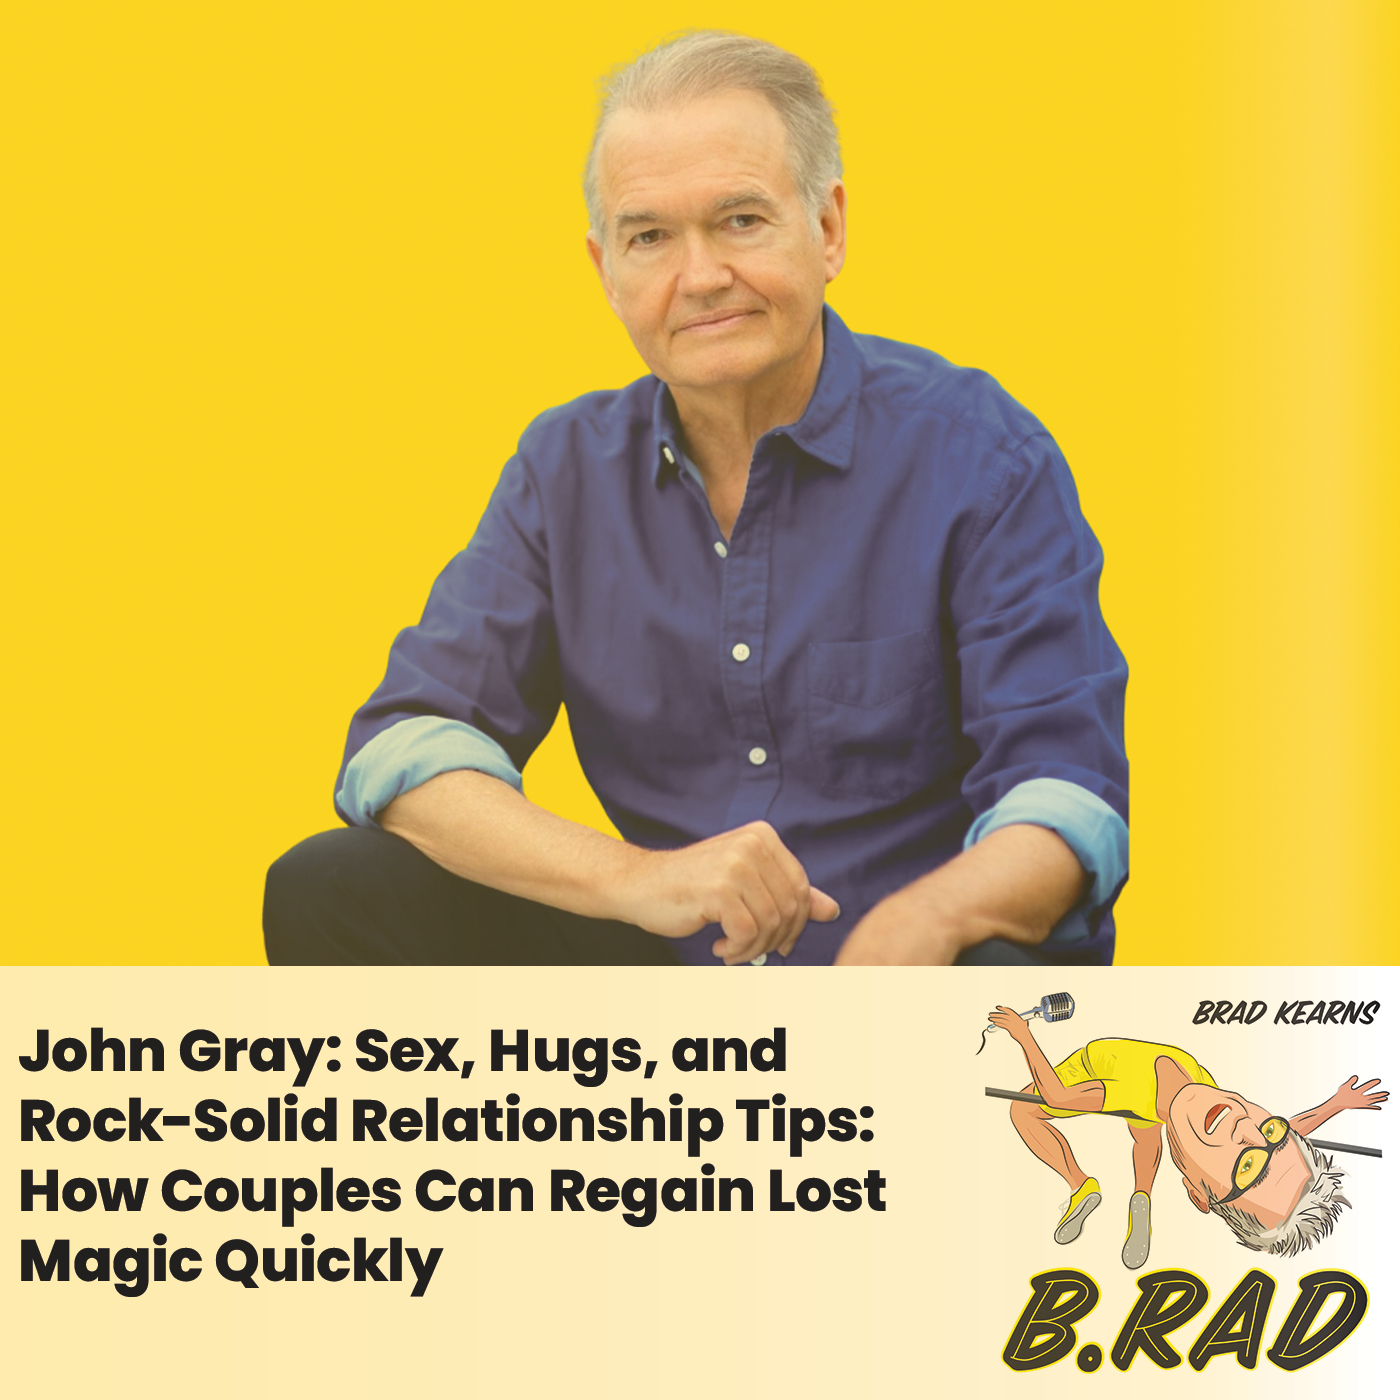 John Gray: Sex, Hugs, and Rock-Solid Relationship Tips: How Couples Can Regain Lost Magic Quickly